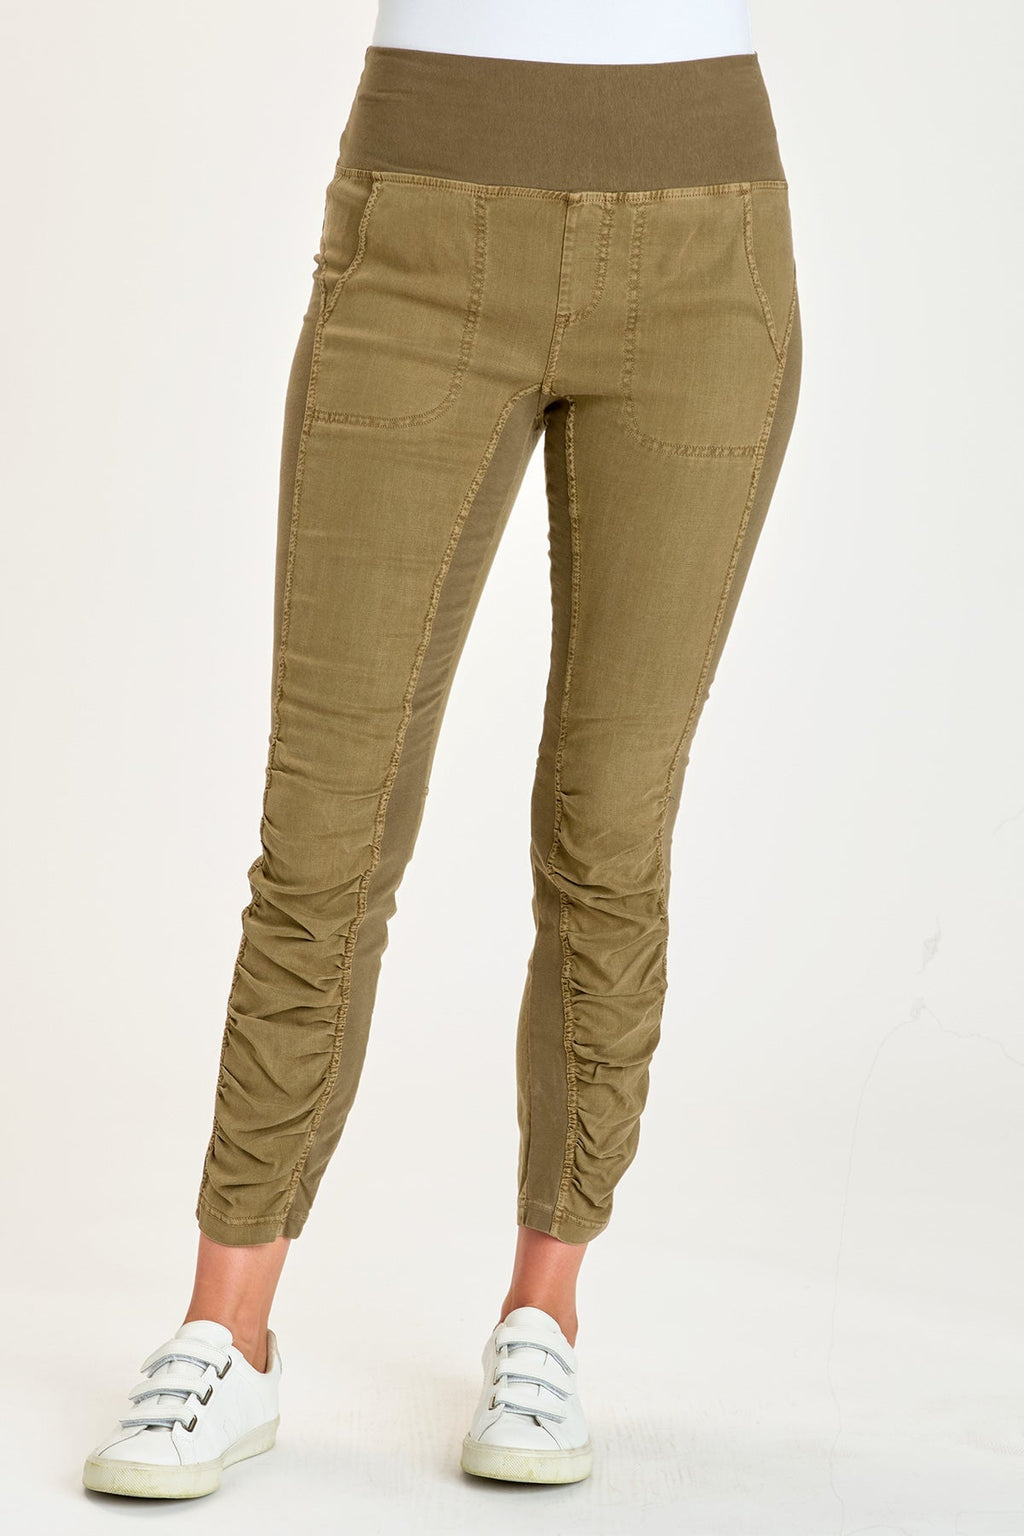 Twill Penny Legging (multiple colors)